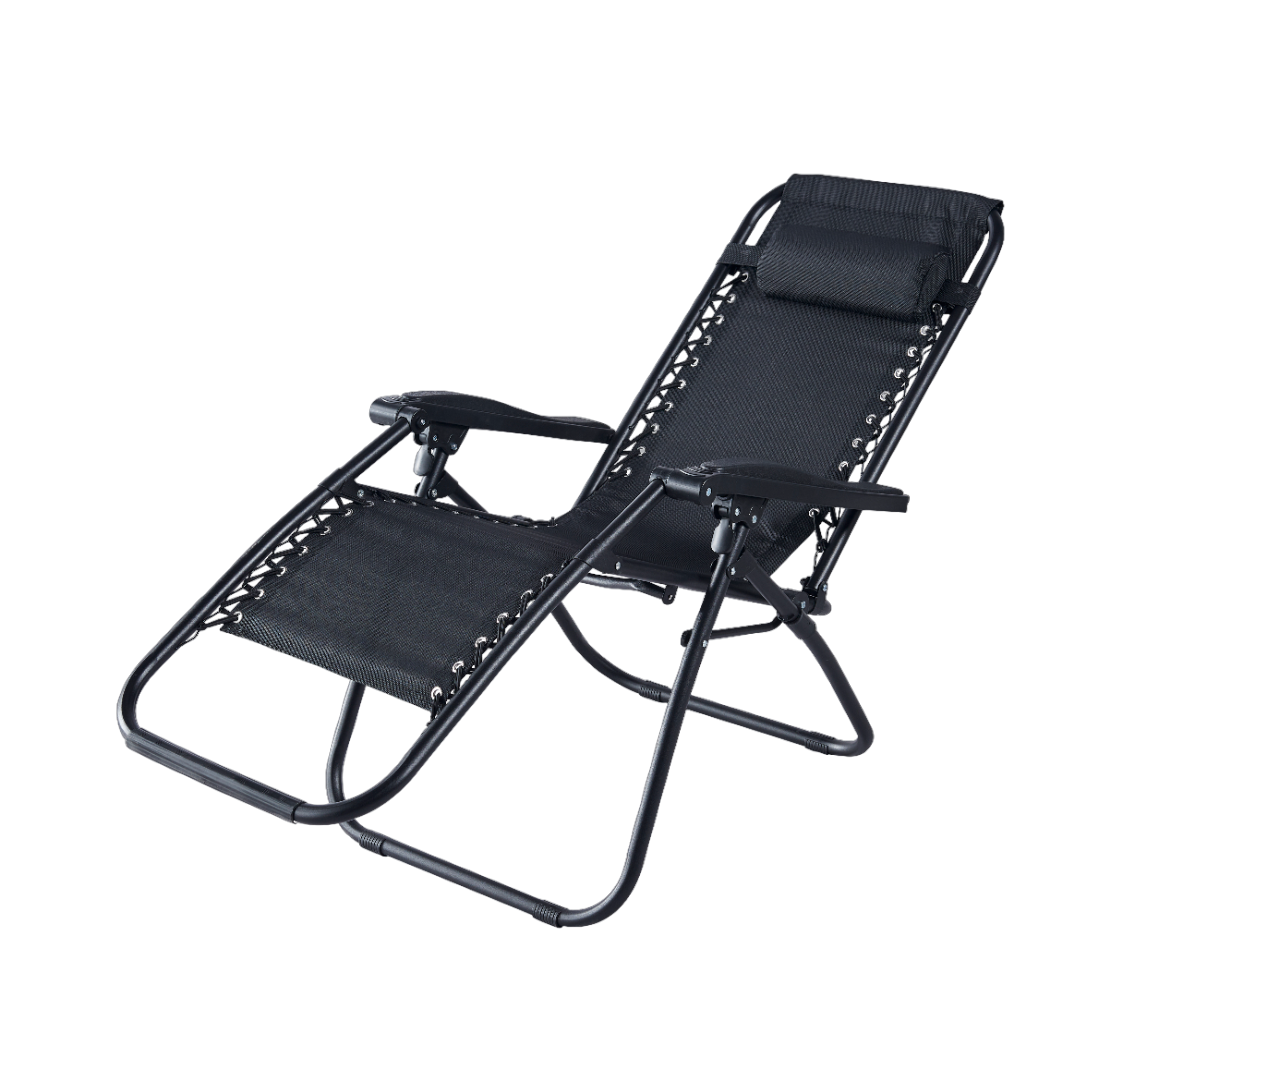 Garden Sun Lounger with Headrest and Folding Side Table, 2 Chairs in 1 Box, KJF0123